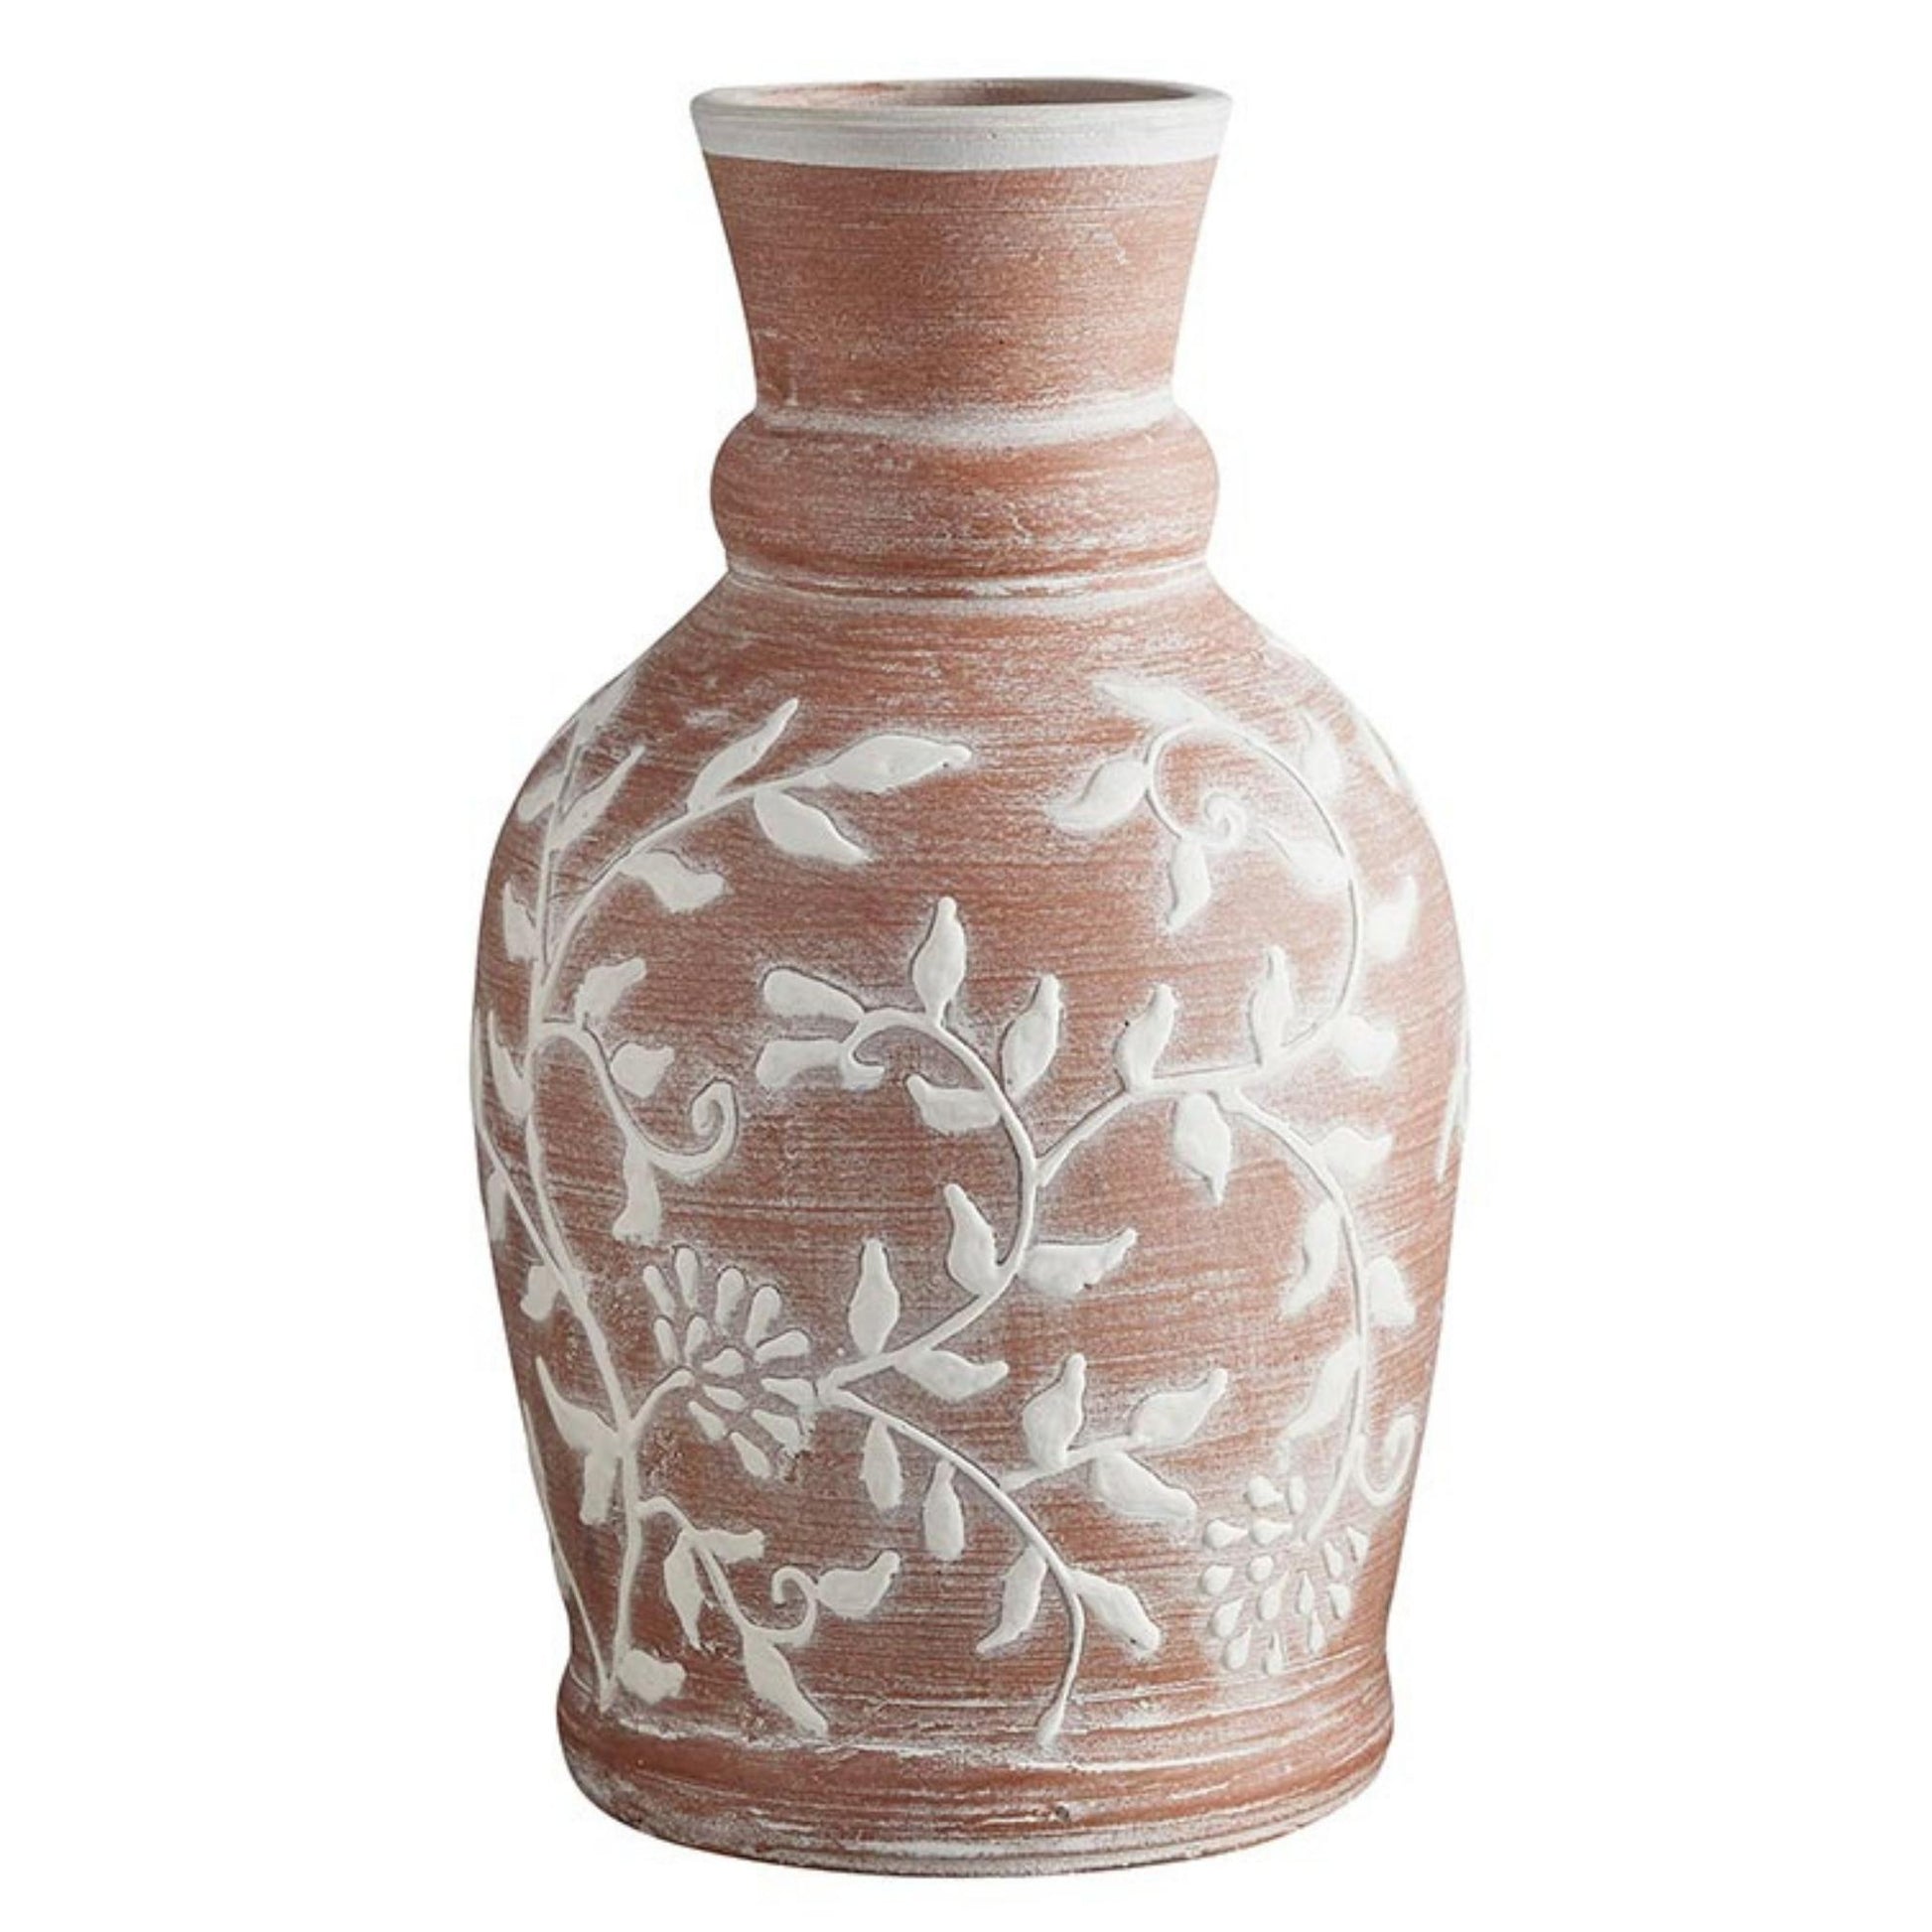 Earthy Terracotta Vases with Textured White Floral Design - 3 Designs to Choose From | Tall Terra Cotta Vase Shown | InsideOutCatalog.com